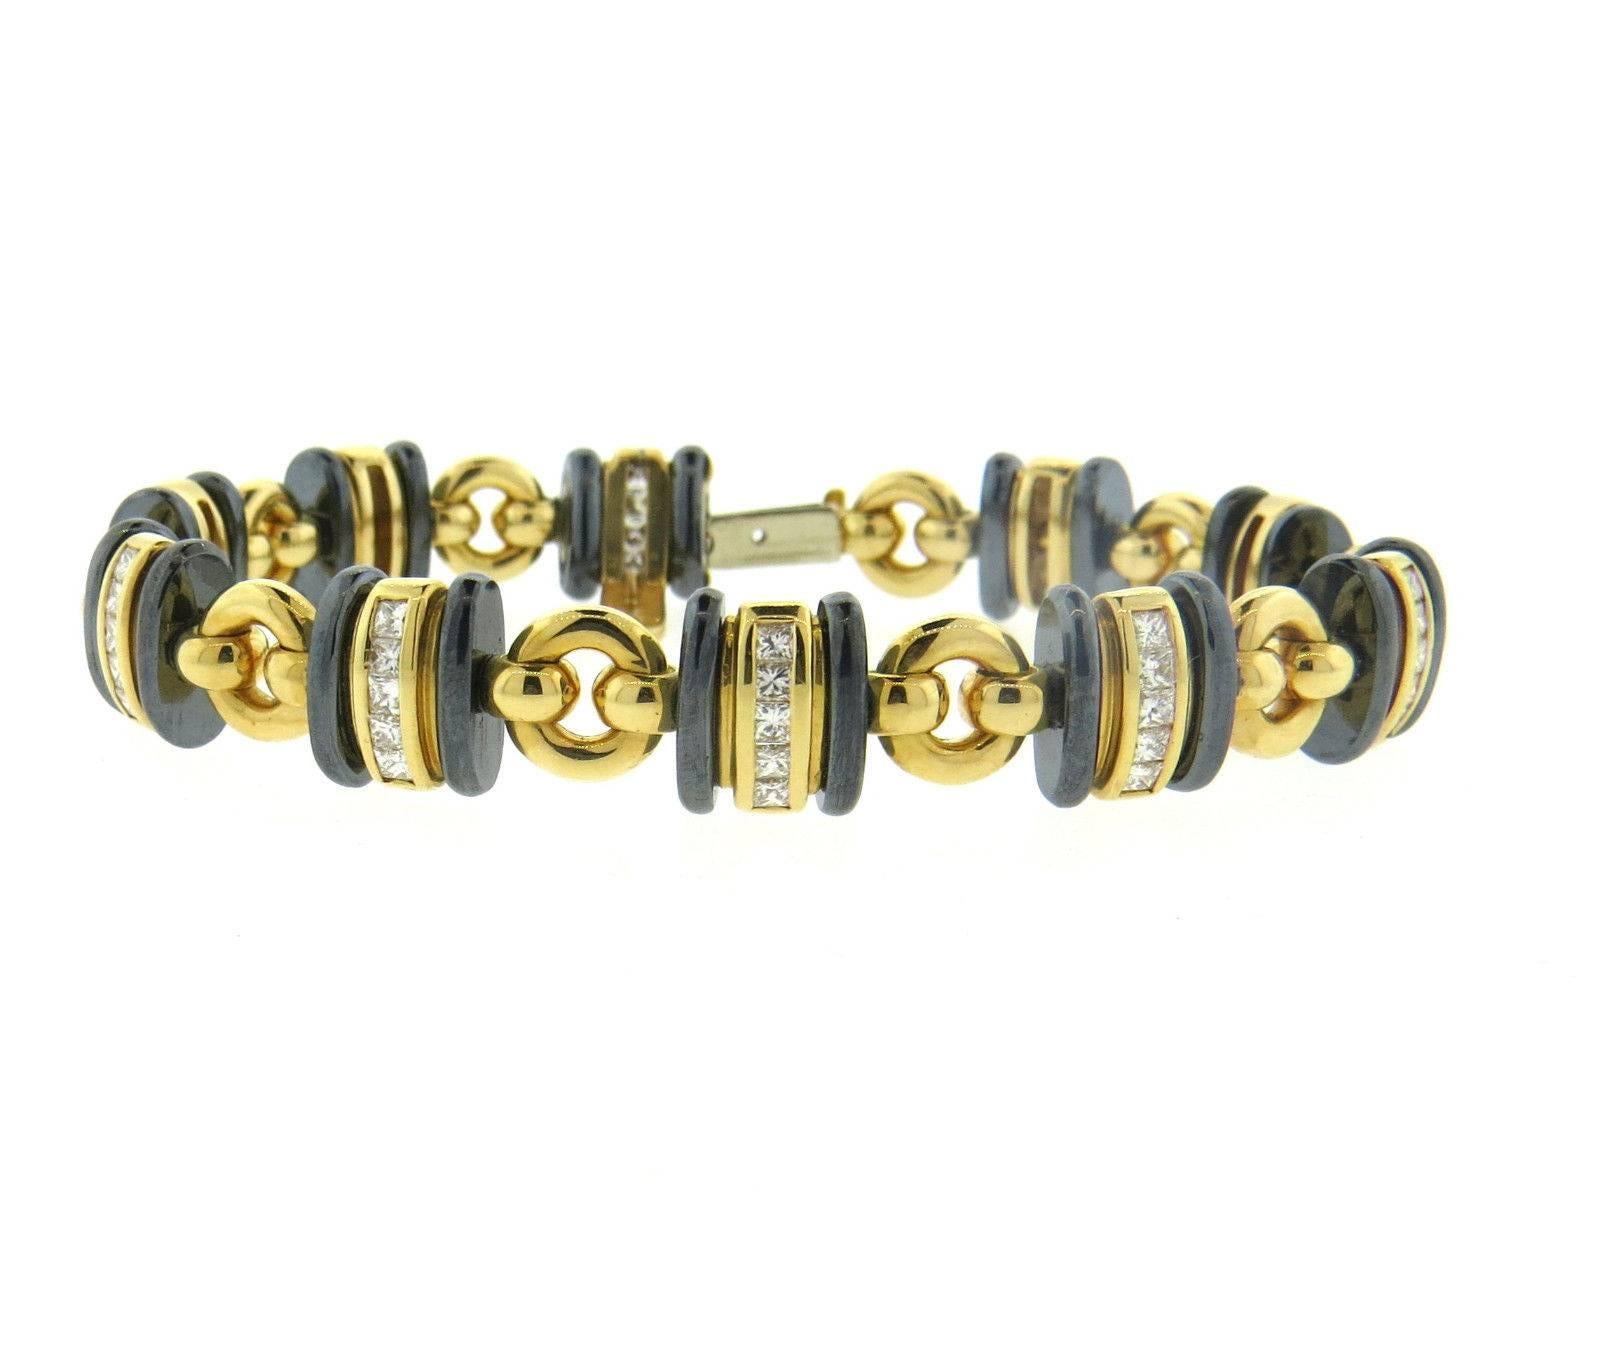 An 18k yellow gold bracelet set with approximately 2.00ctw of G/VS diamonds and hematite links. The bracelet is  7 1/4